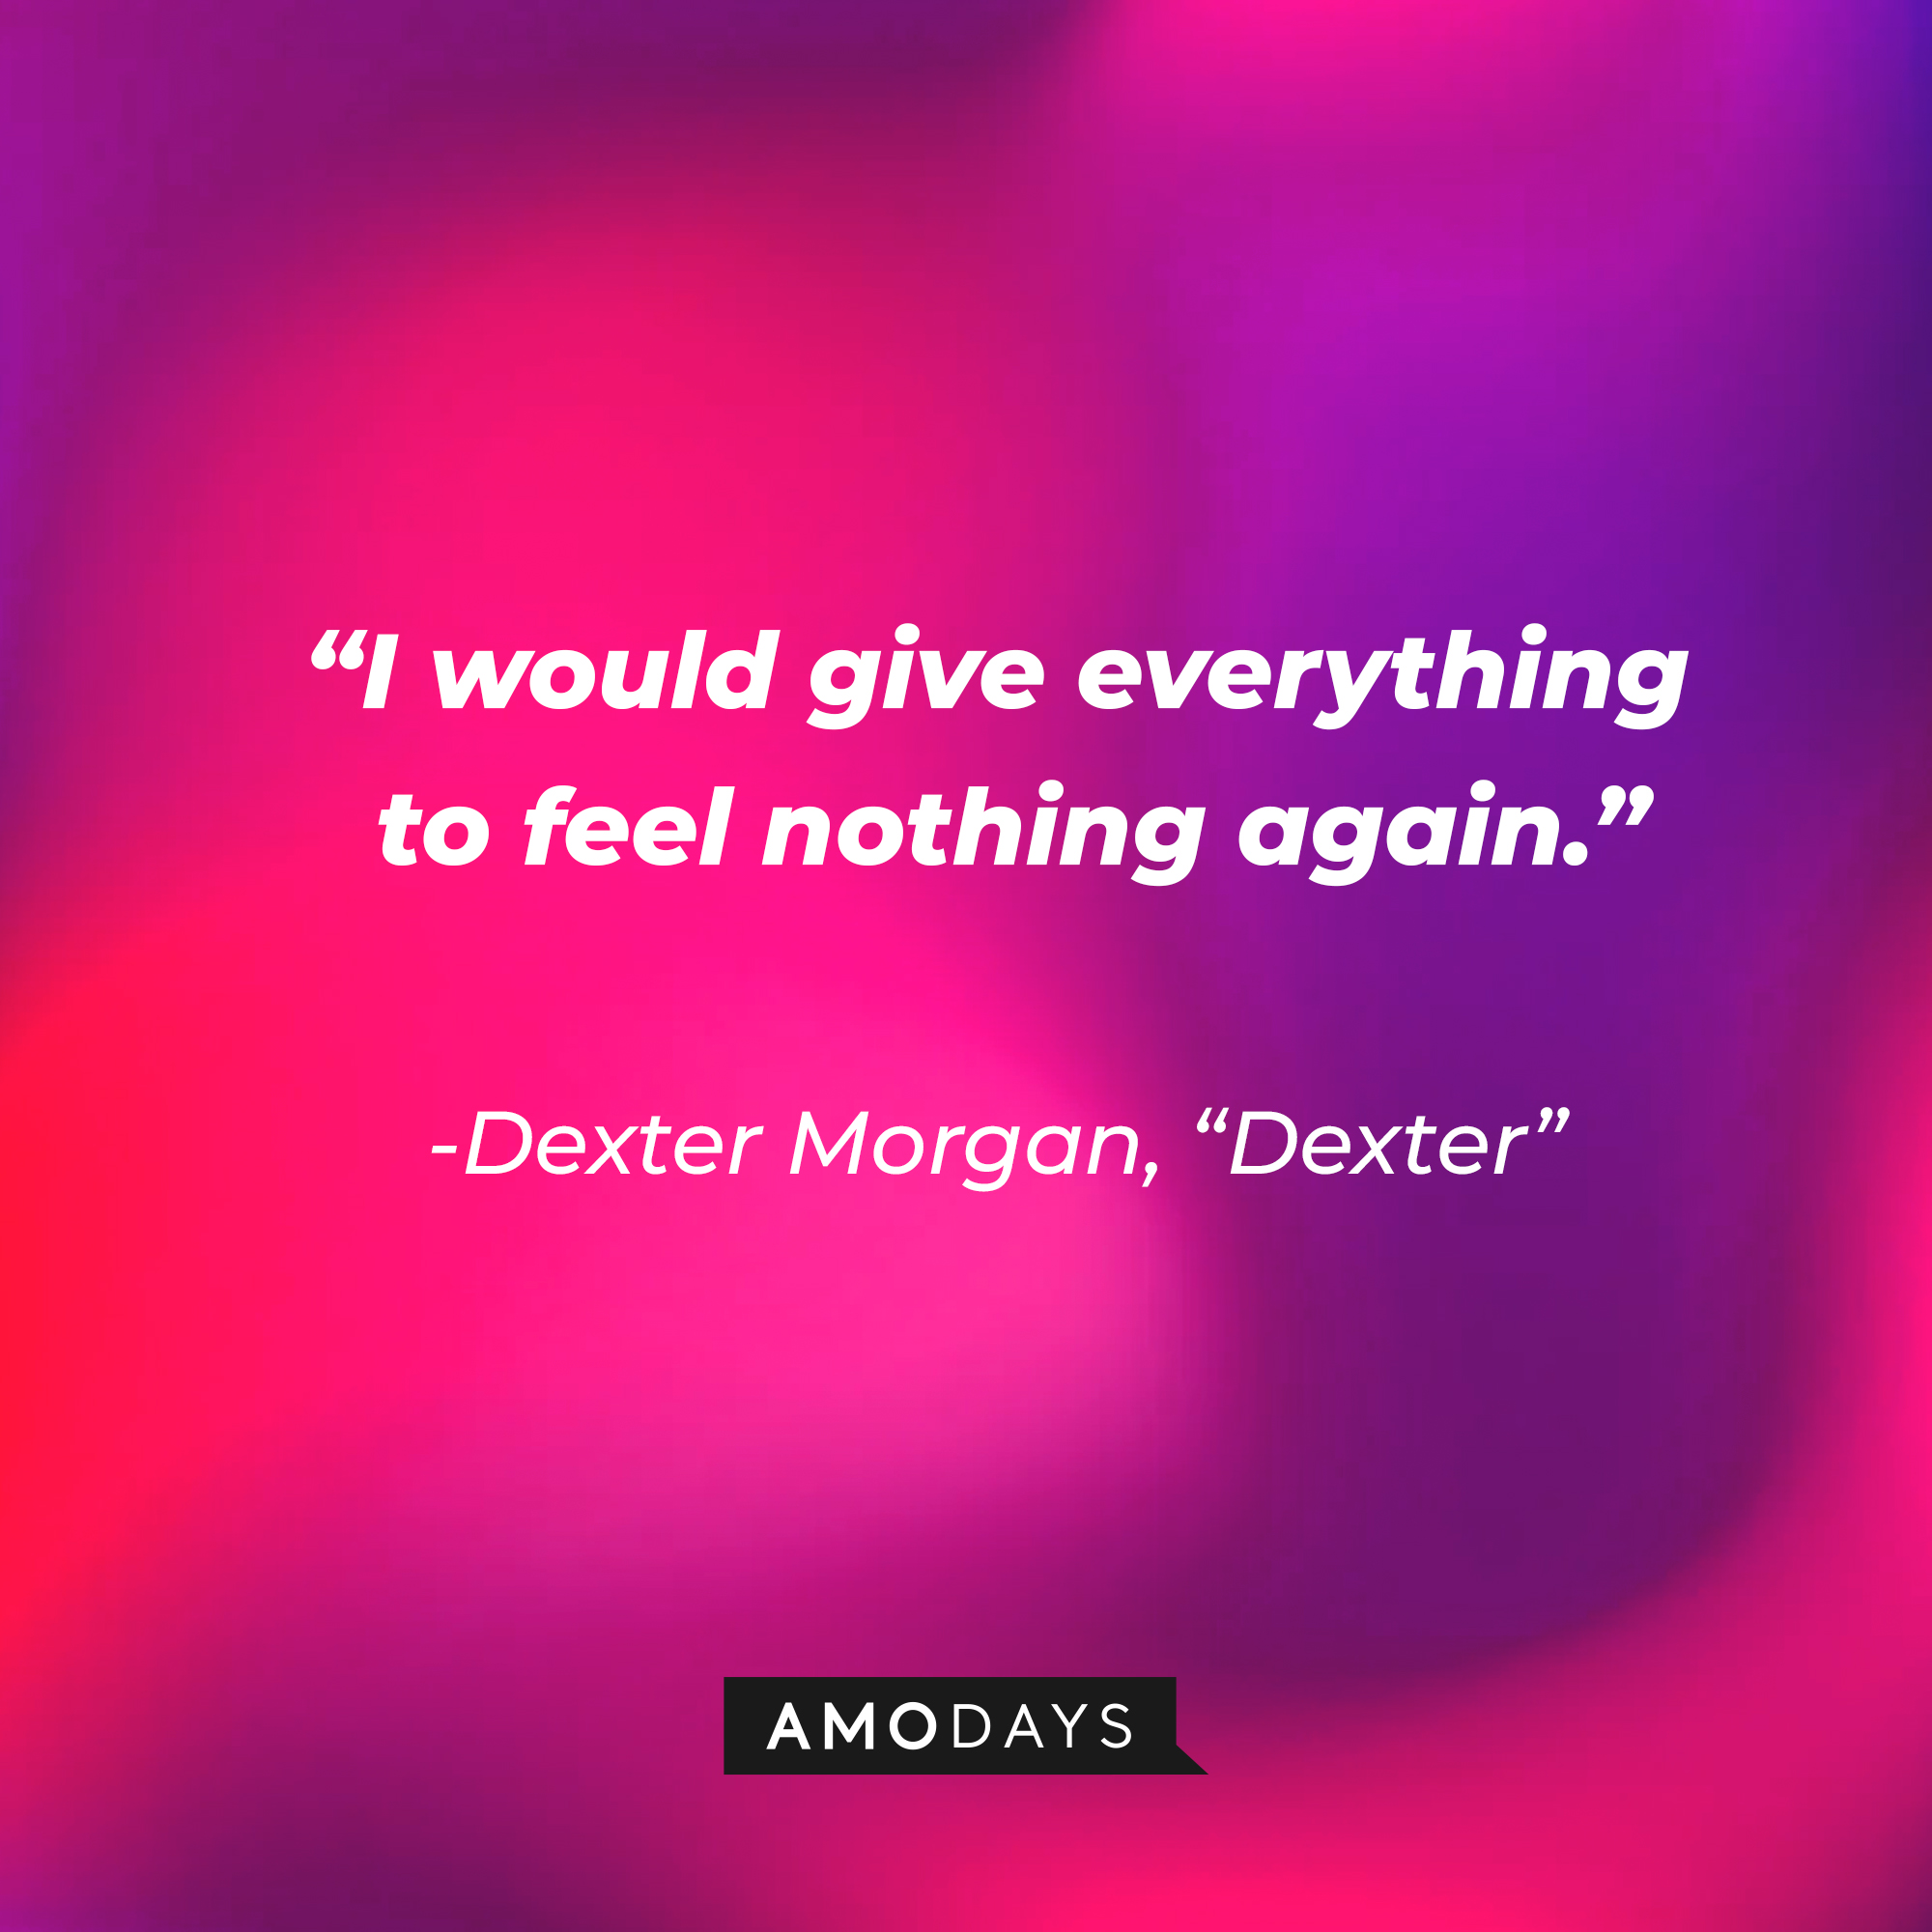 Dexter Morgan's quote from "Dexter:" “I would give everything to feel nothing again.” | Source: AmoDays